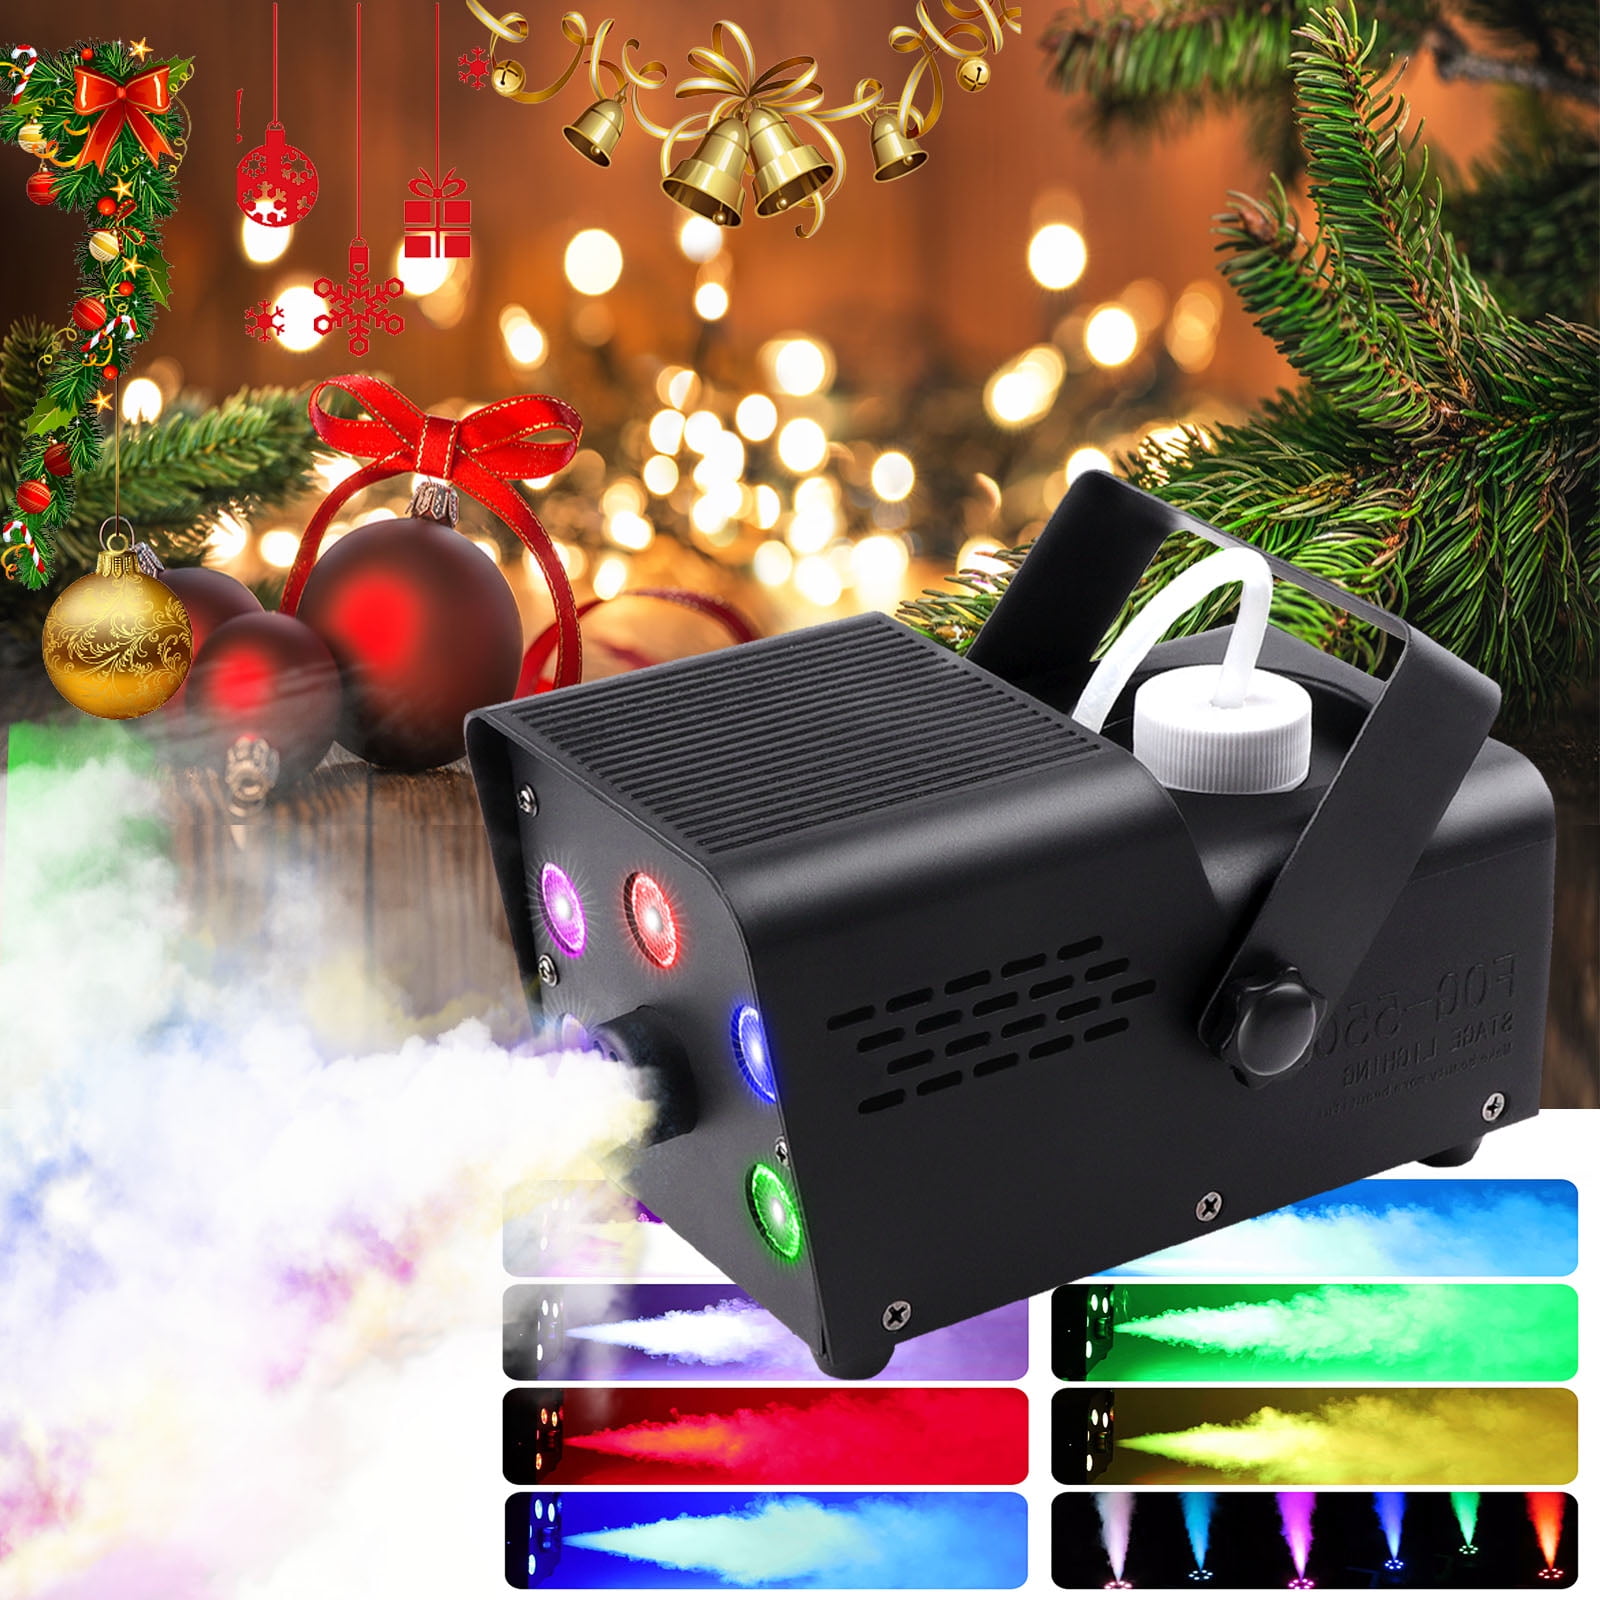 Donner Halloween Fog Machines 500W with Controllable RGB LED